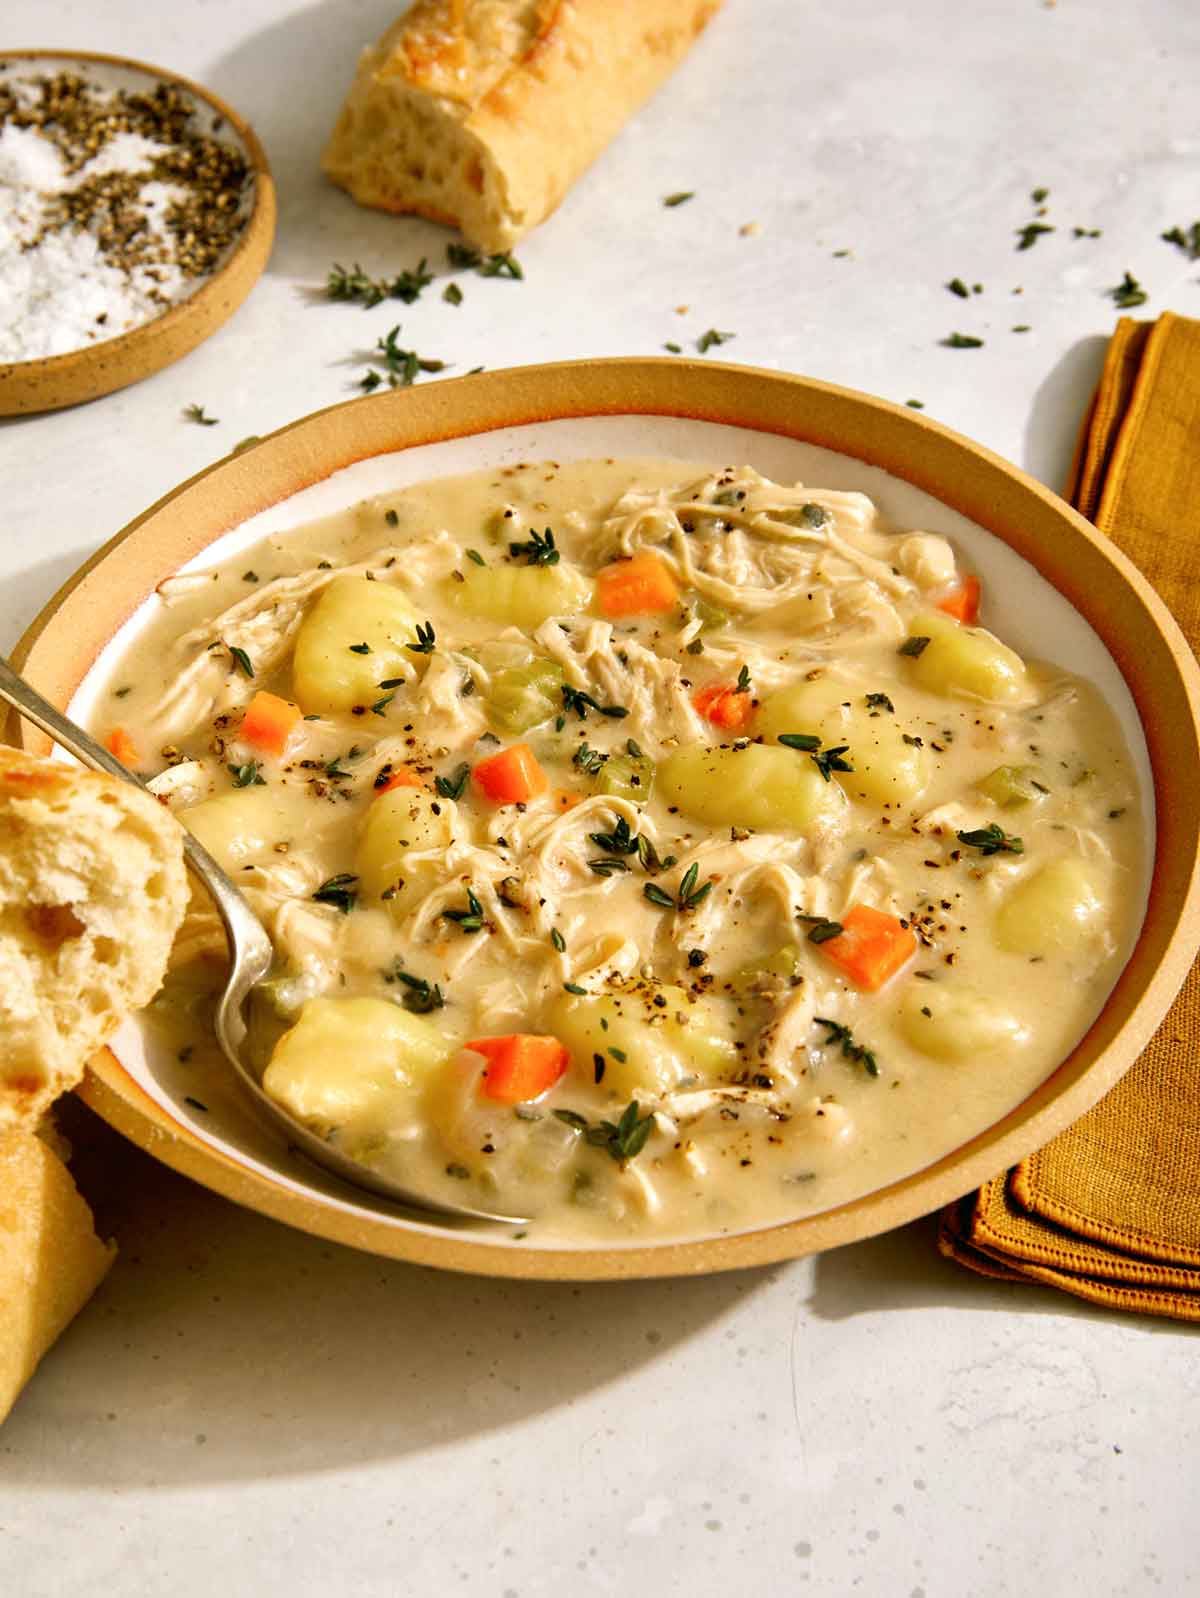 Chicken and gnocchi in a bowl with bread. 